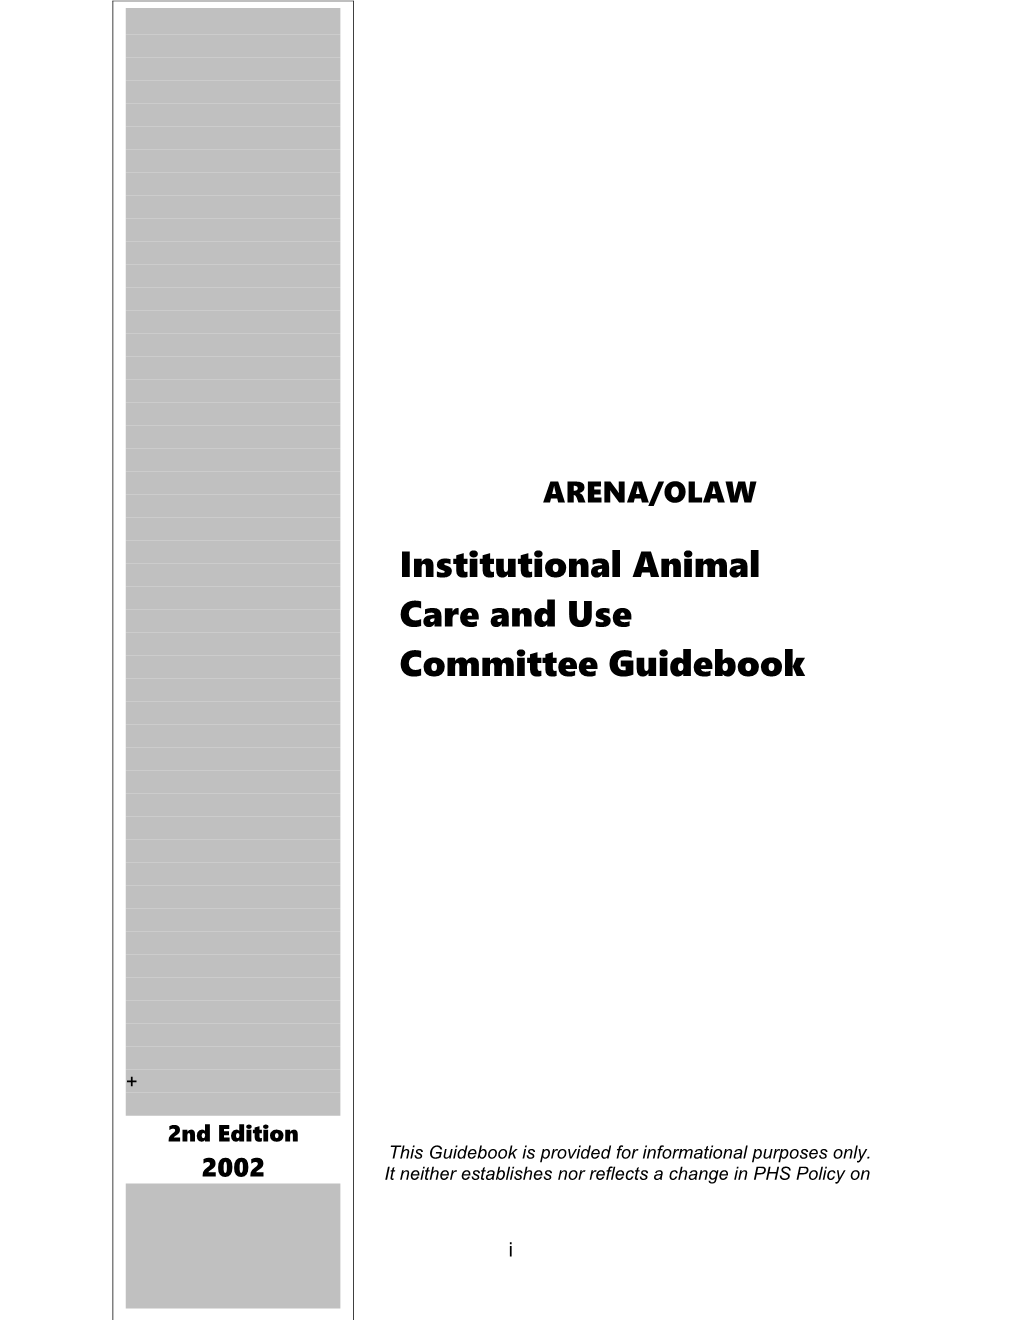 Institutional Animal Care and Use Committee Guidebook